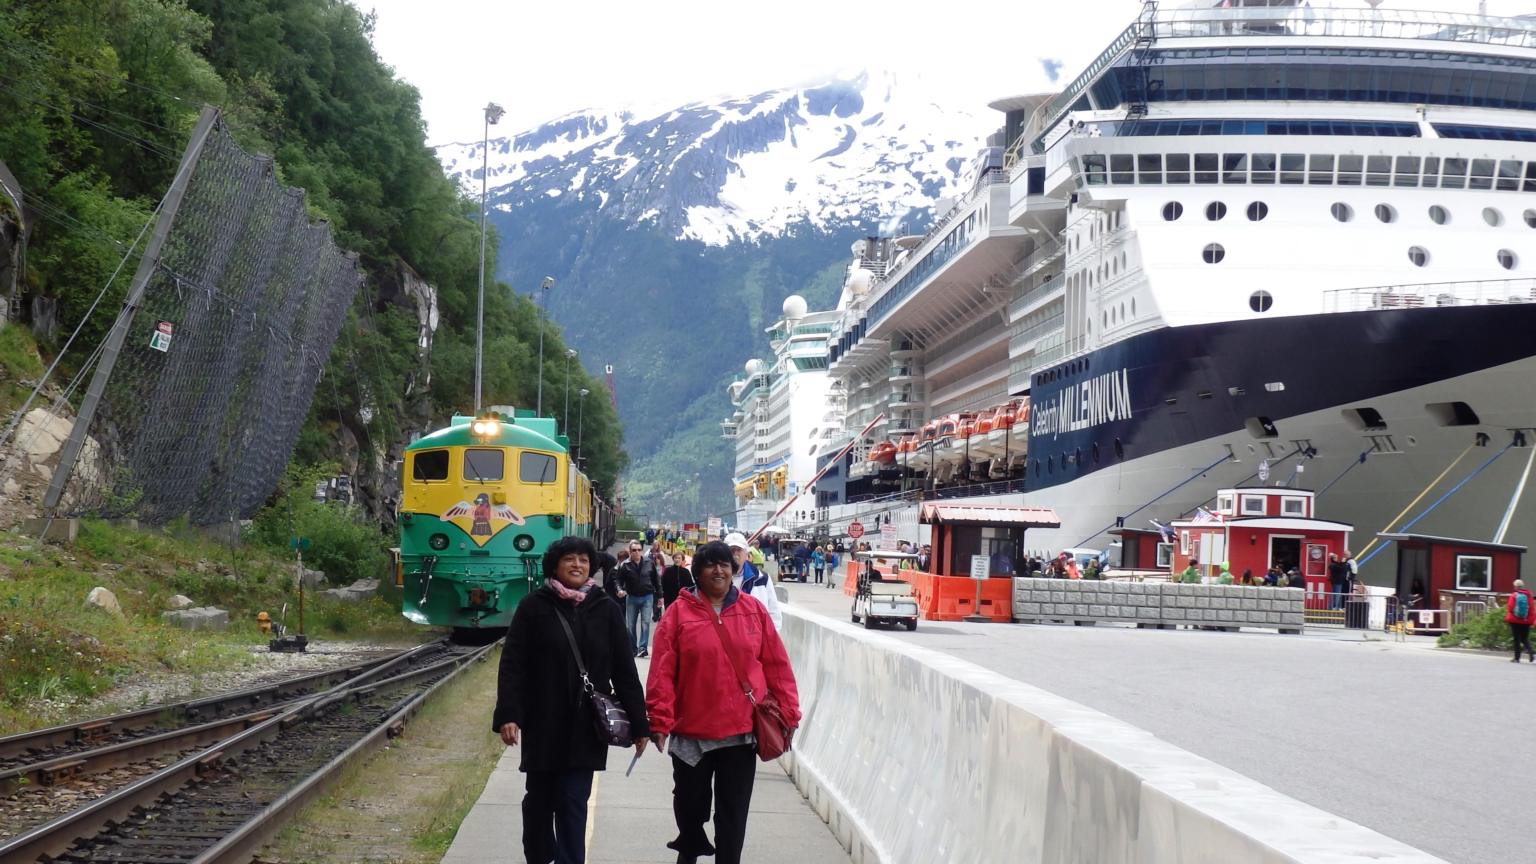 Cruise lines are taking bookings for an Alaska cruise season that might